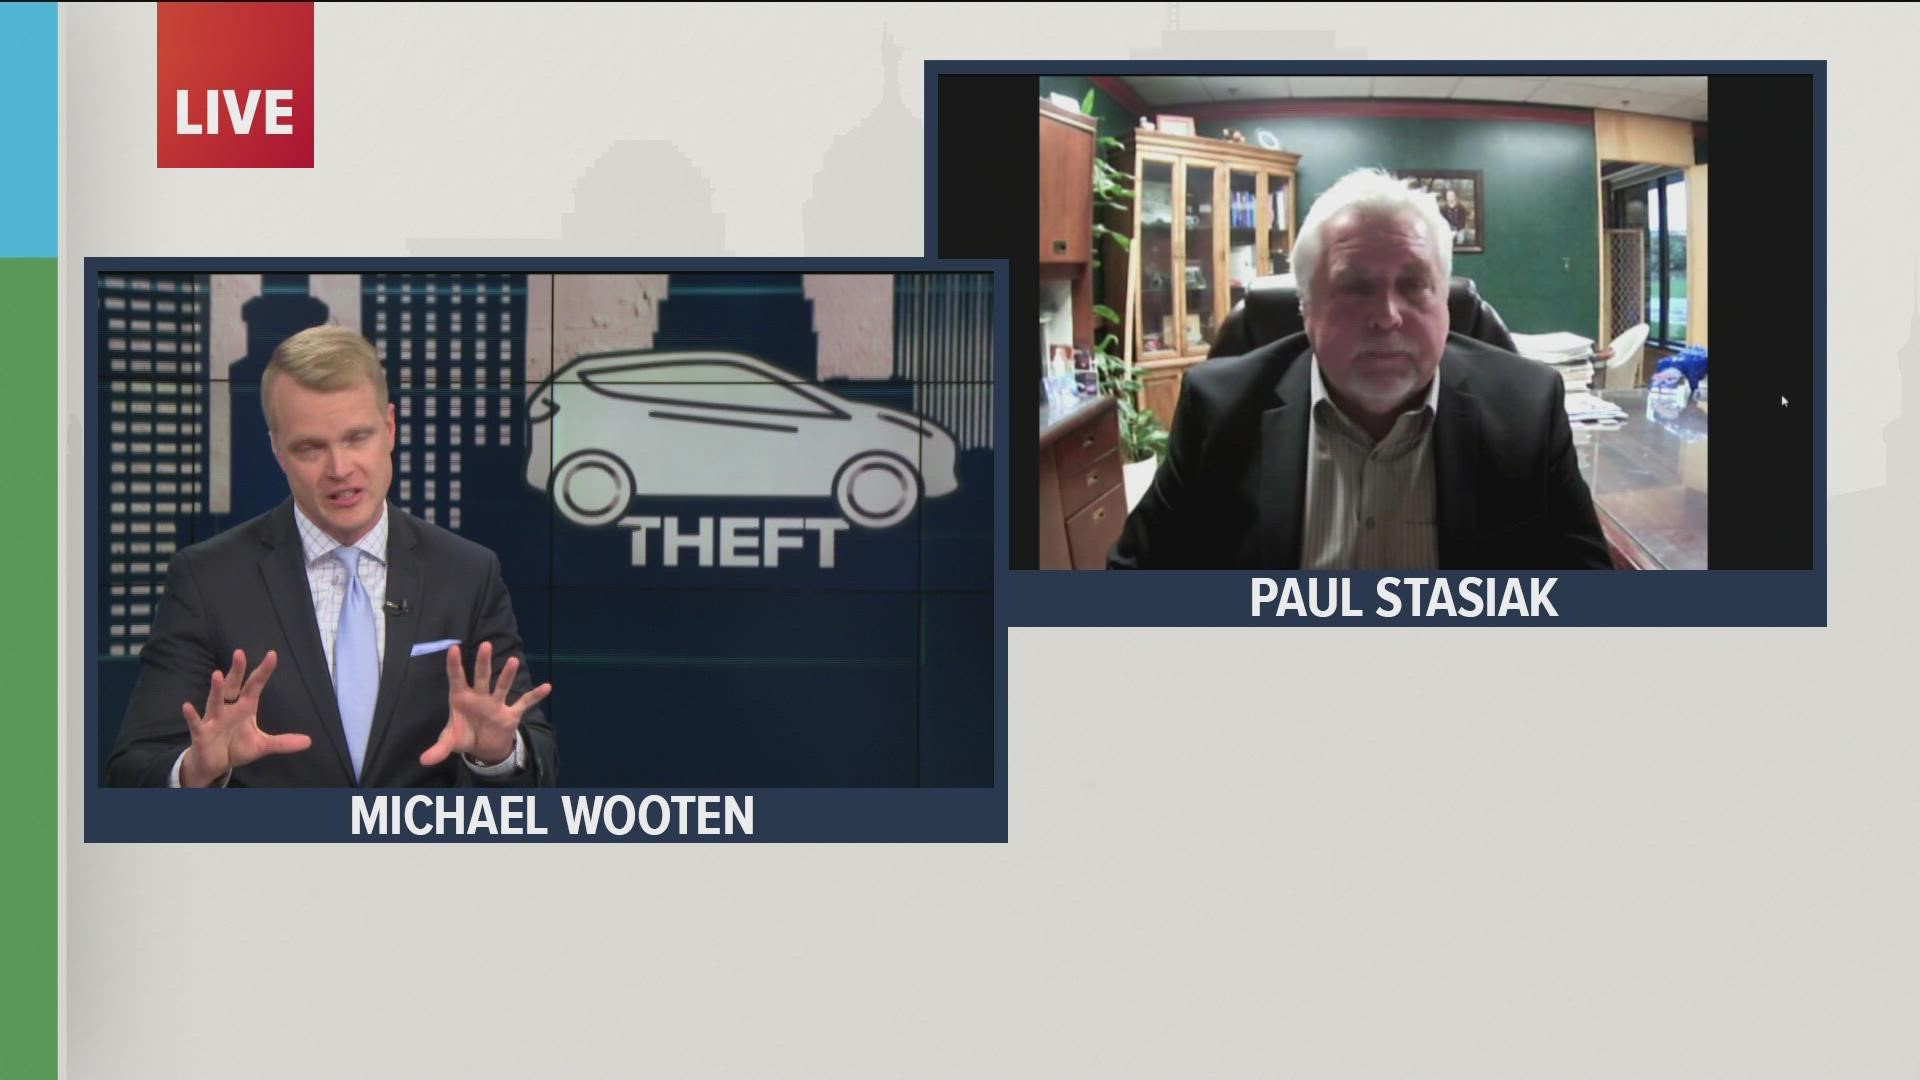 Paul Stasiak, President of the Niagara Frontier Auto Dealership Association to discuss- a spike in thieves stealing catalytic converters off of cars...